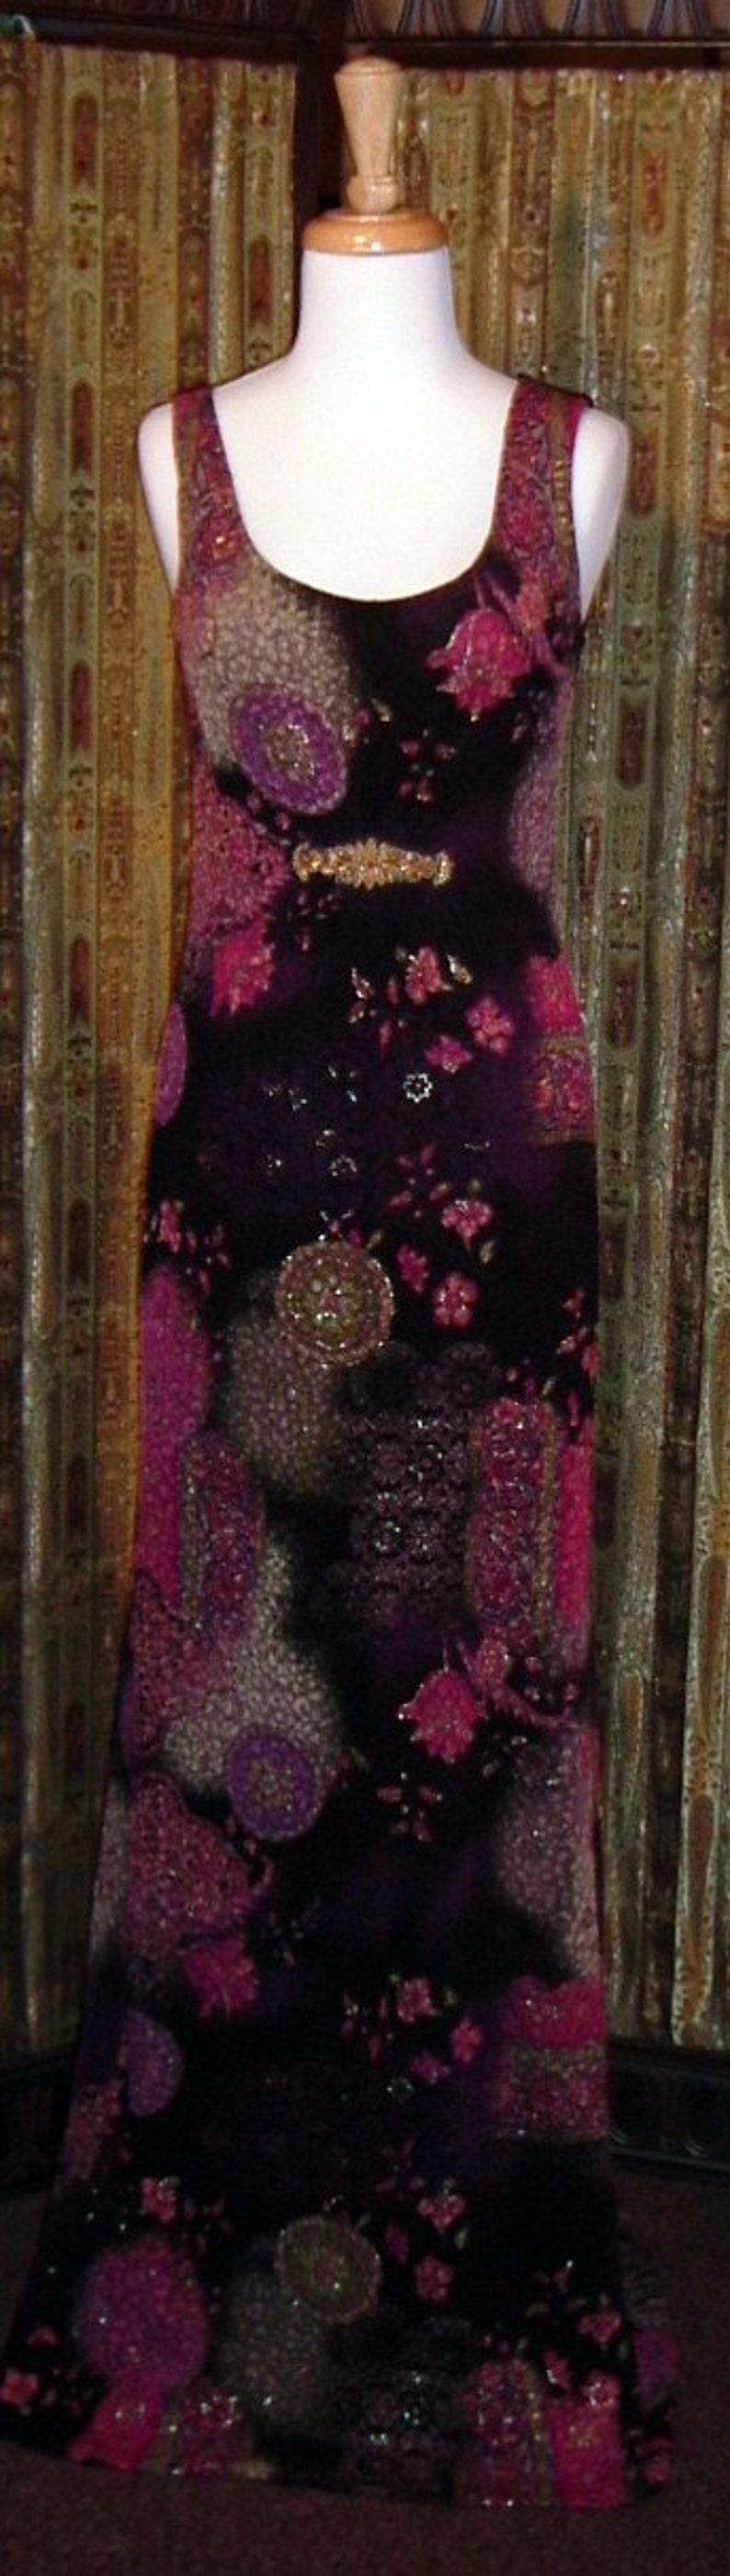 Women's knit gown, Multiprint long knit gown DivaRay Sample Sale Item image 2